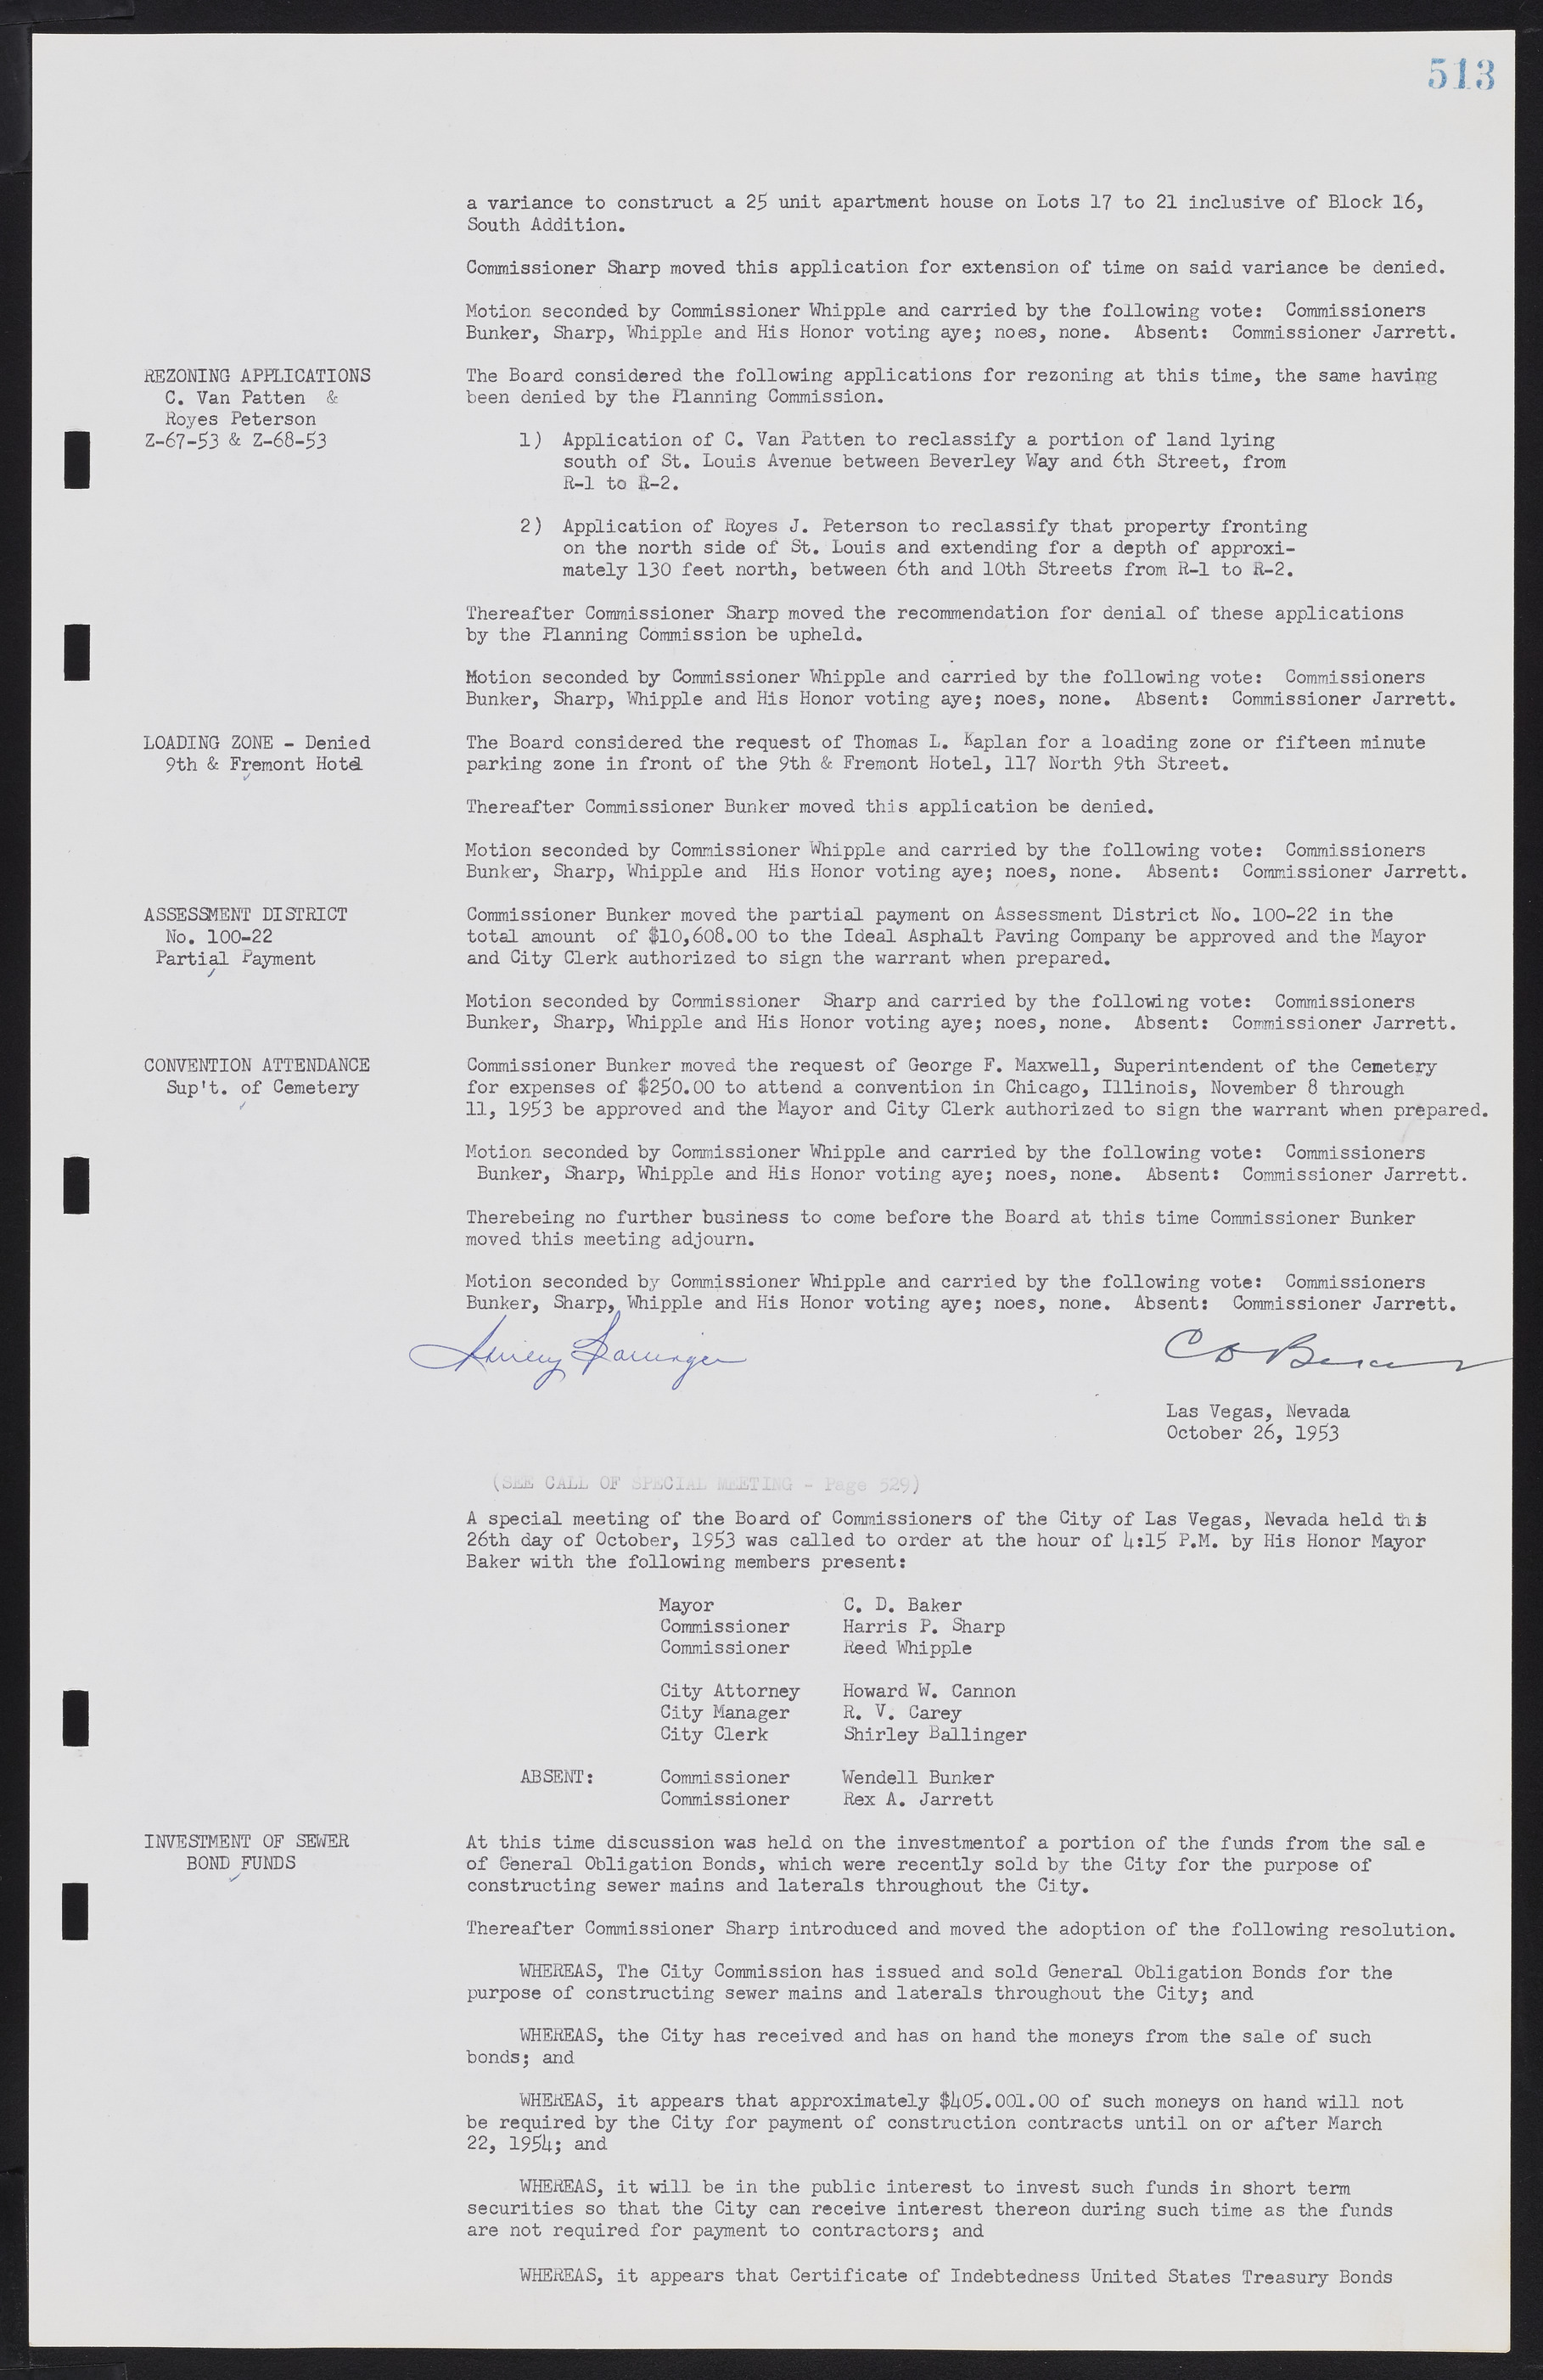 Las Vegas City Commission Minutes, May 26, 1952 to February 17, 1954, lvc000008-543